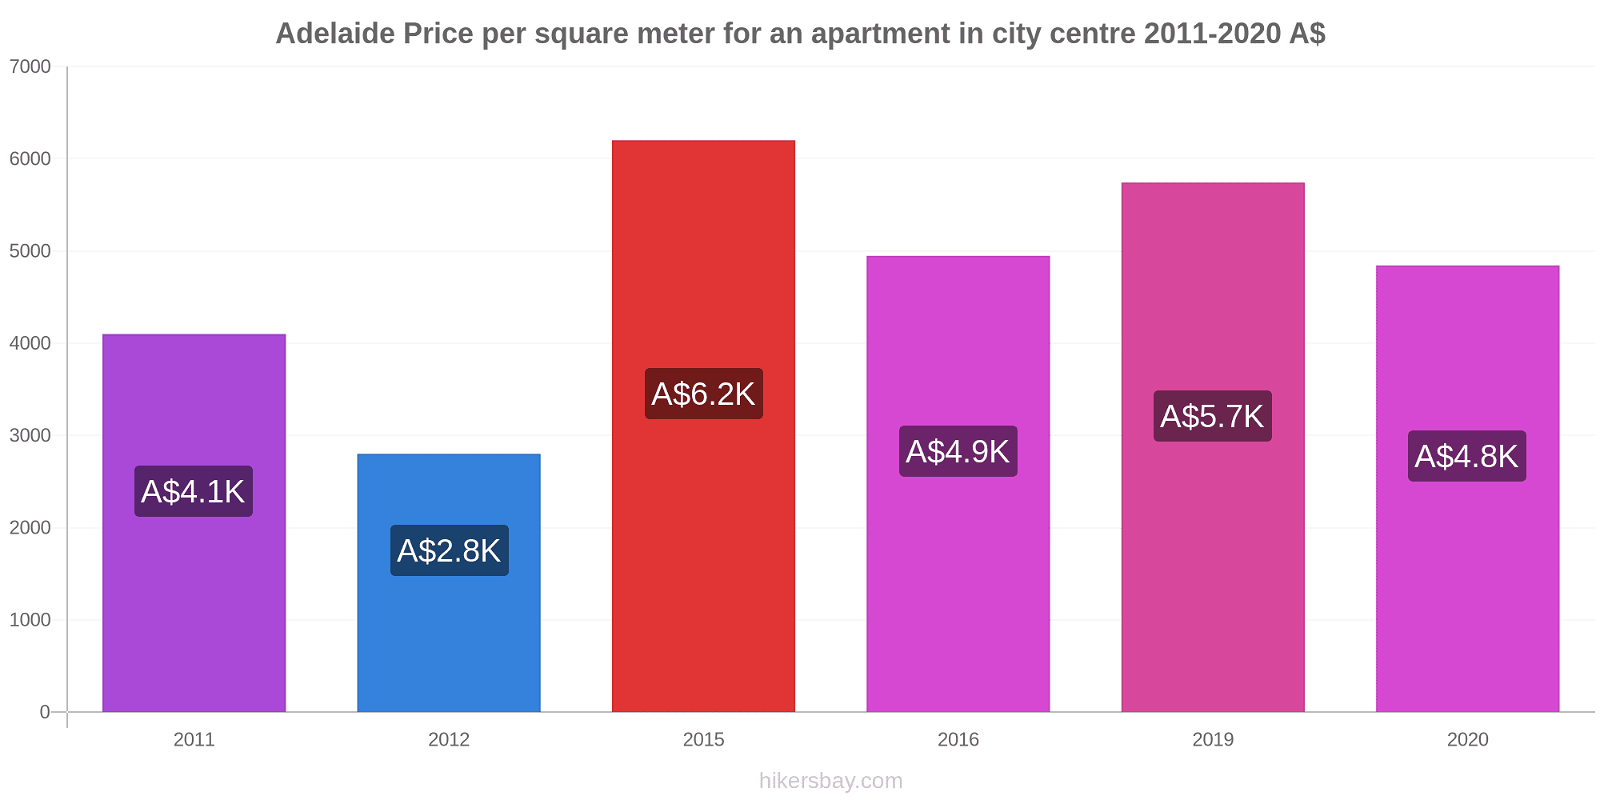 Adelaide price changes Price per square meter for an apartment in city centre hikersbay.com